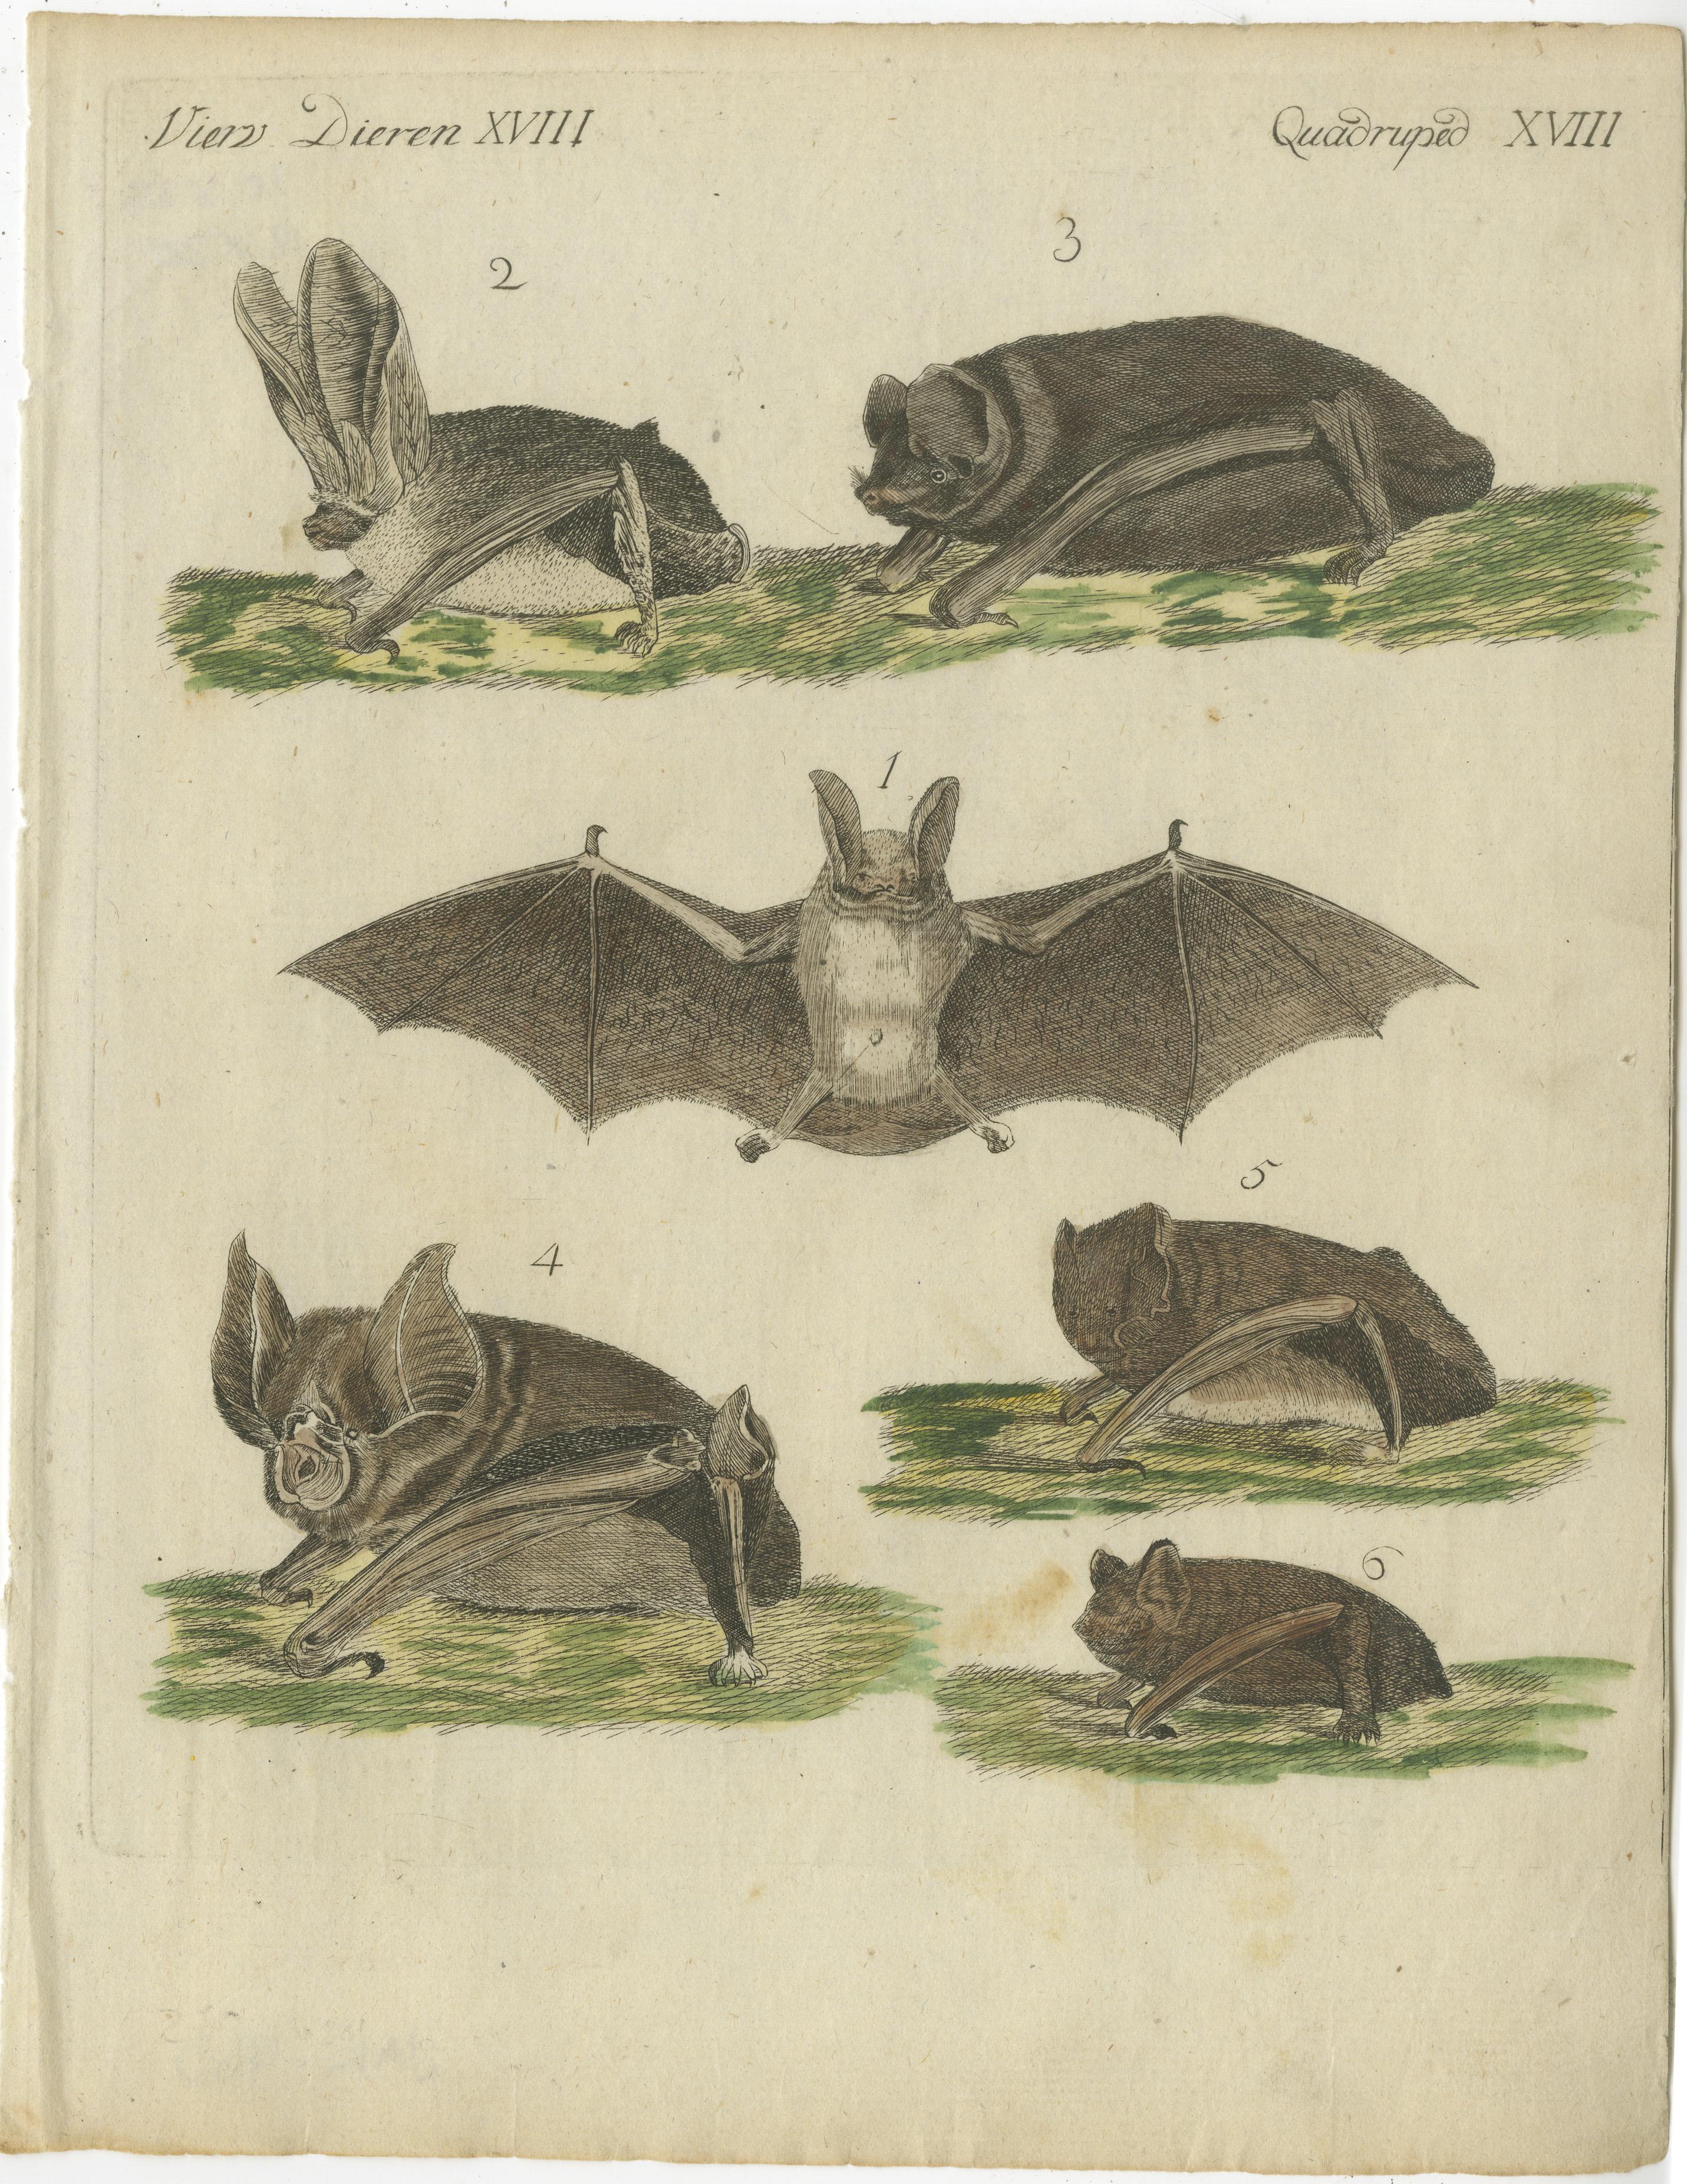 Original antique print of various bats. This engraved print originates from a very rare unknown Dutch work. The plates are similar to the plates in the famous German work: ‘Bilderbuch fur Kinder' by F.J. Bertuch, published 1790-1830 in Weimar. This